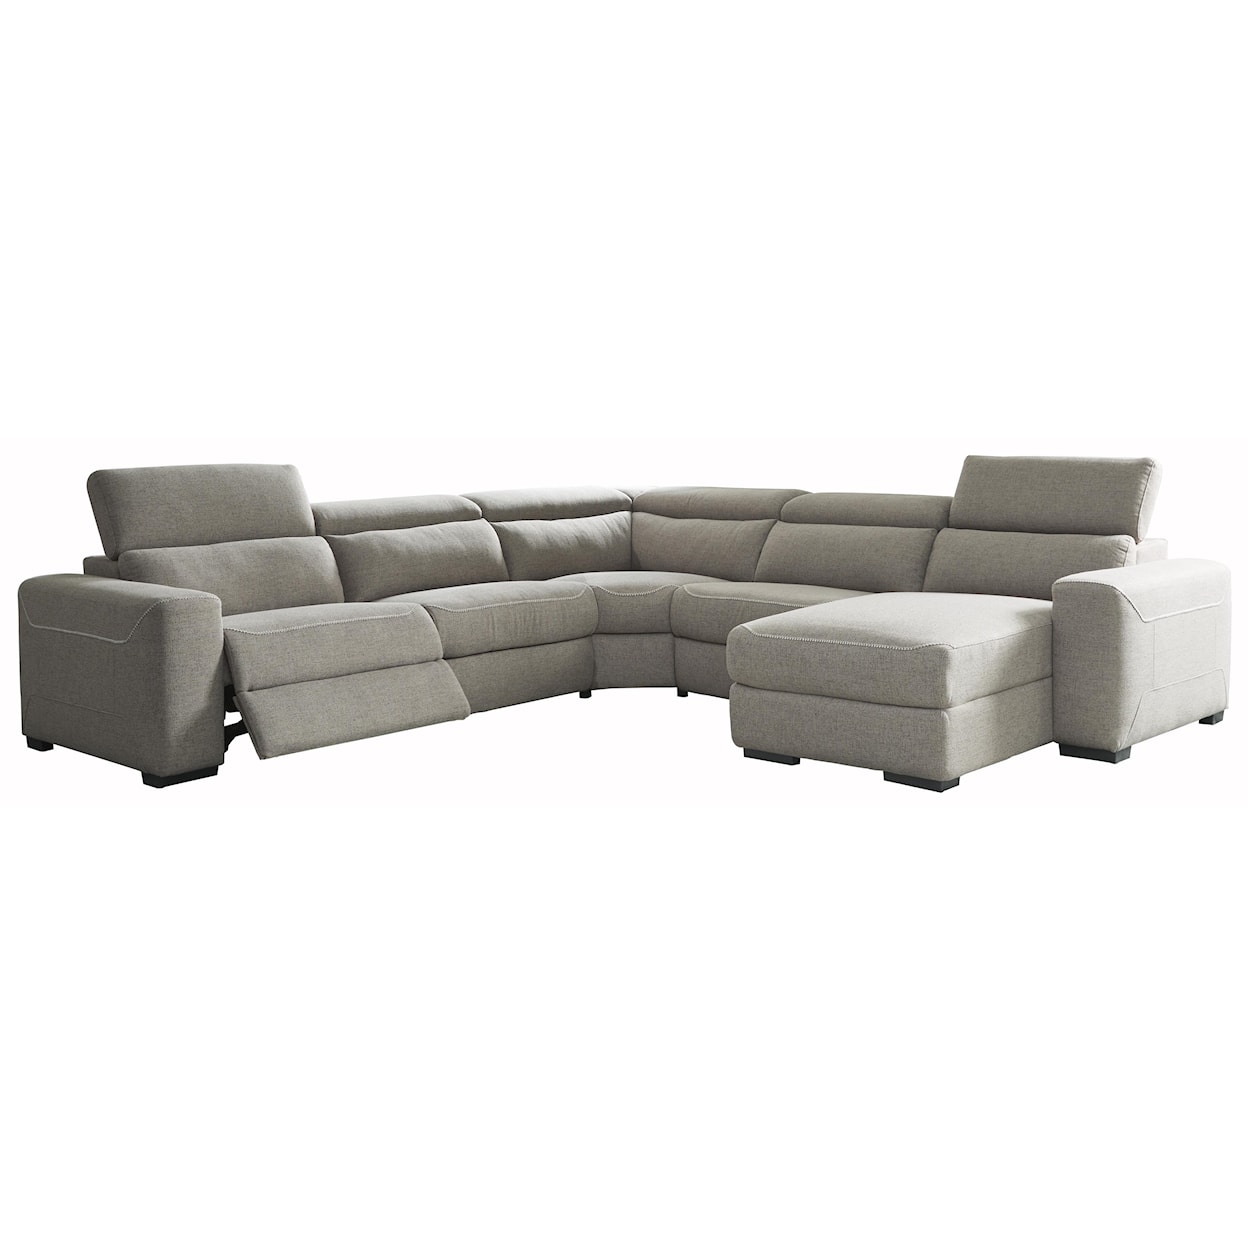 Signature Design by Ashley Mabton 5 Piece Power Reclining Sectional Sofa